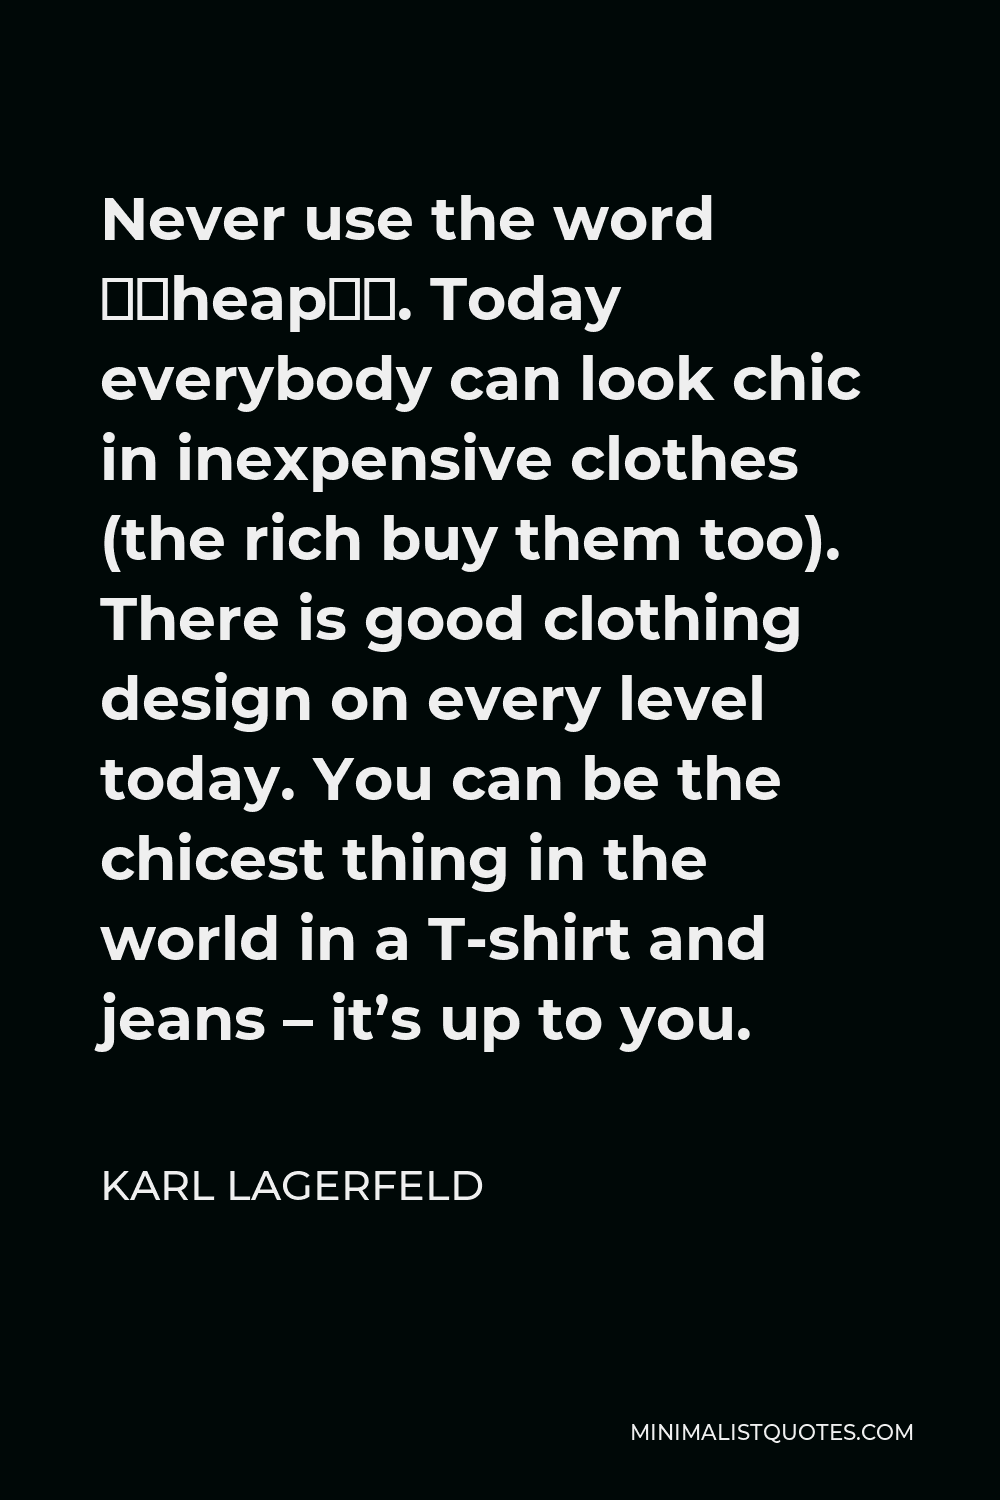 Karl Lagerfeld Quote - Never use the word “cheap”. Today everybody can look chic in inexpensive clothes (the rich buy them too). There is good clothing design on every level today. You can be the chicest thing in the world in a T-shirt and jeans – it’s up to you.